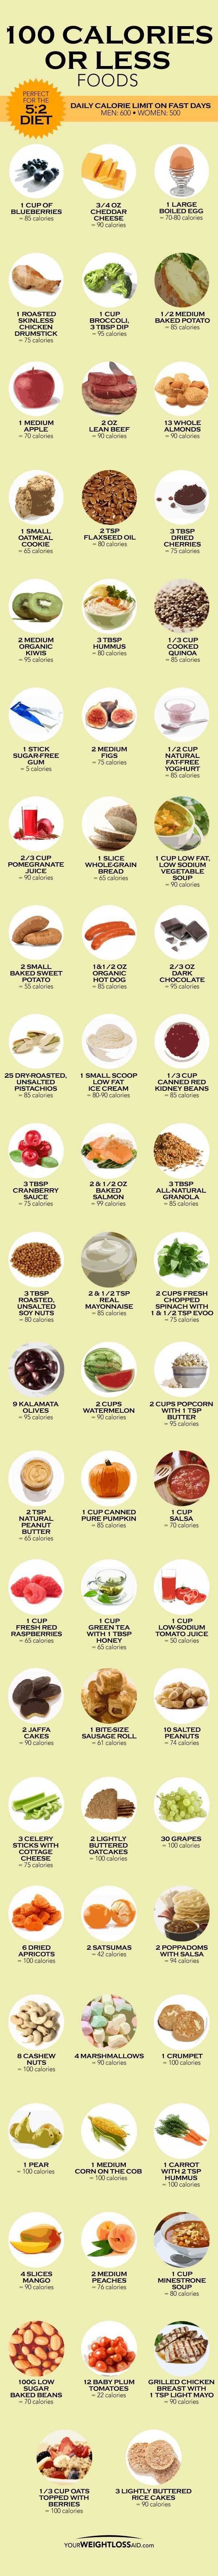 100 Calories Or Less Foods